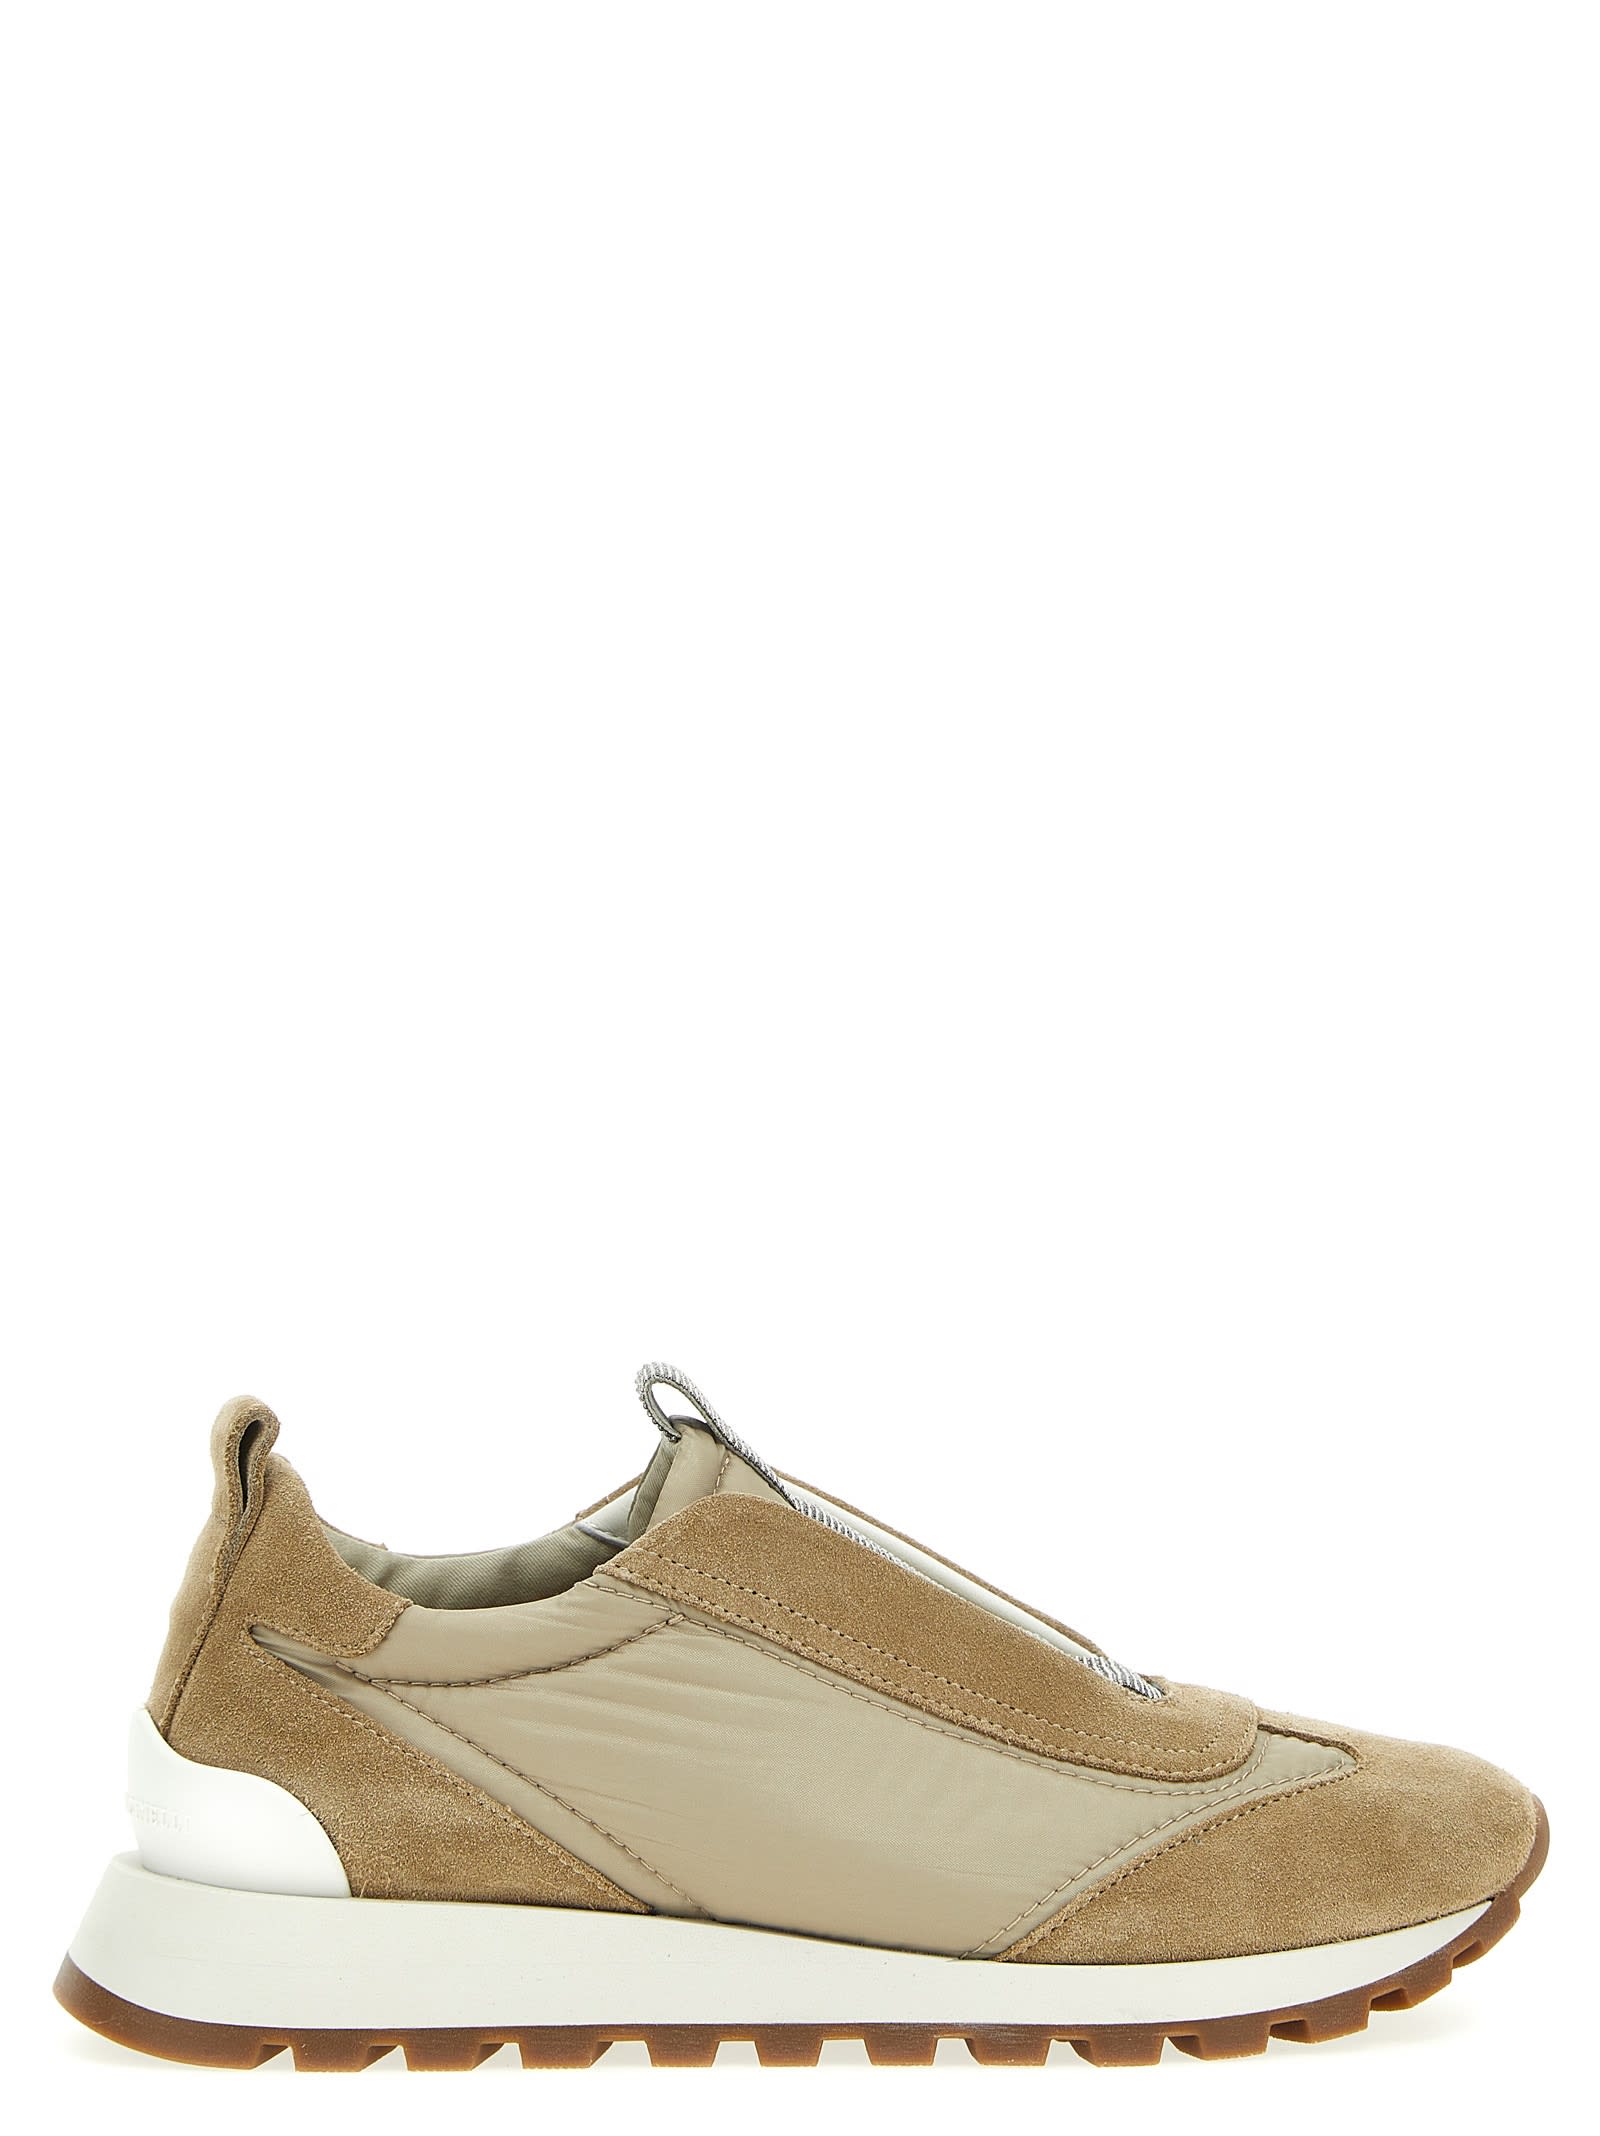 Brunello Cucinelli Runner Shoe In Suede And Taffeta Embellished With Threads Of Brilliant Monili